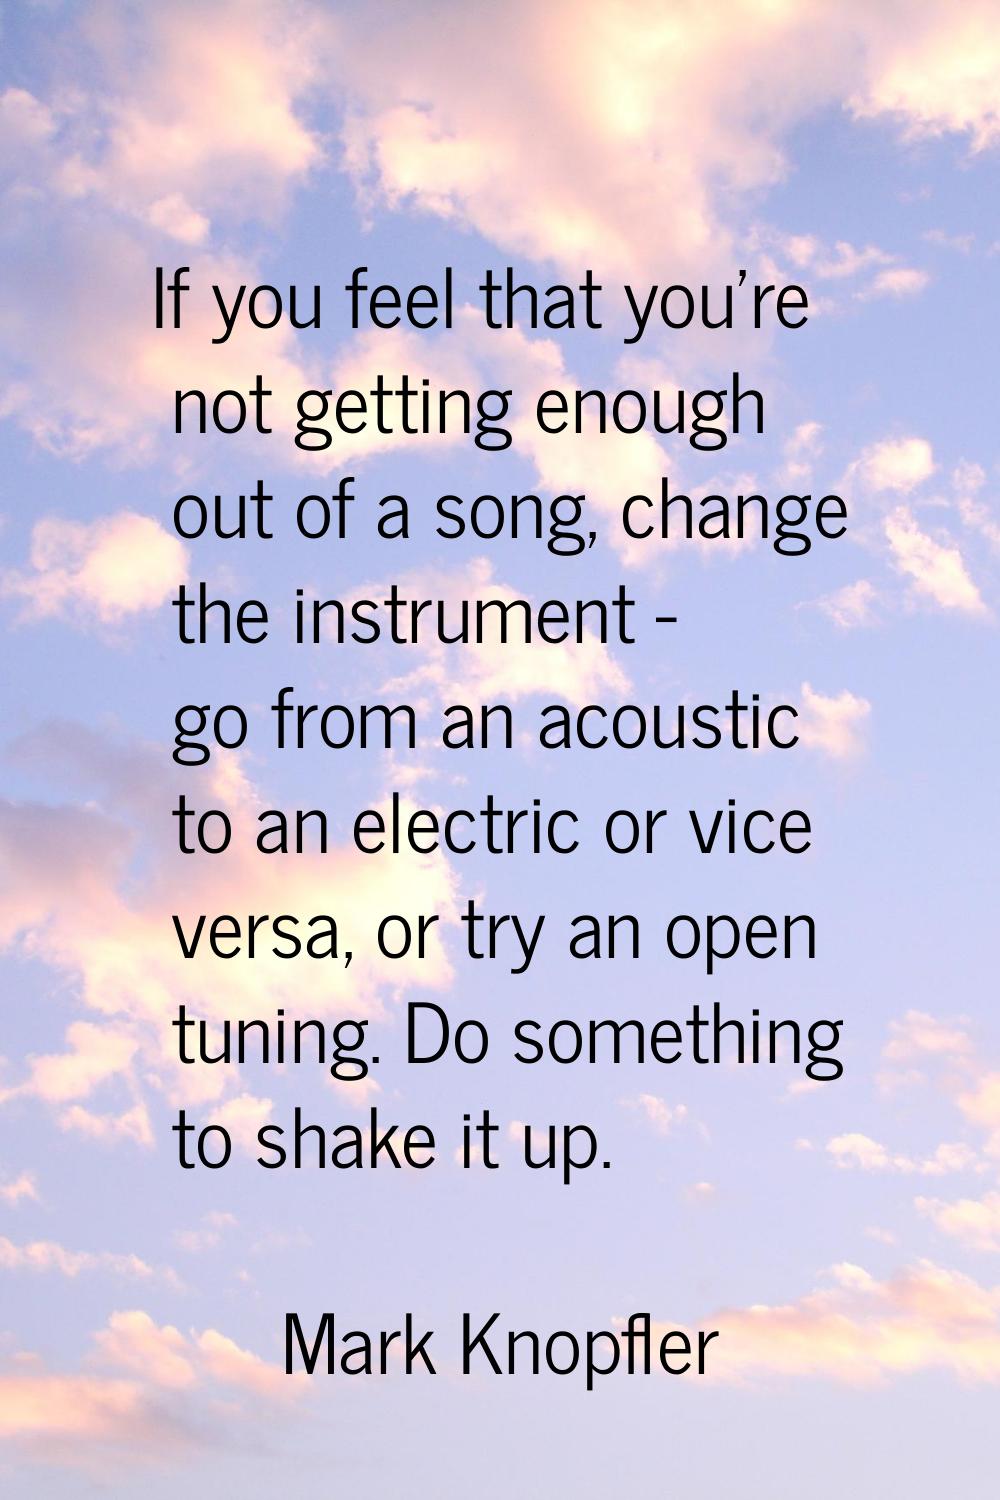 If you feel that you're not getting enough out of a song, change the instrument - go from an acoust